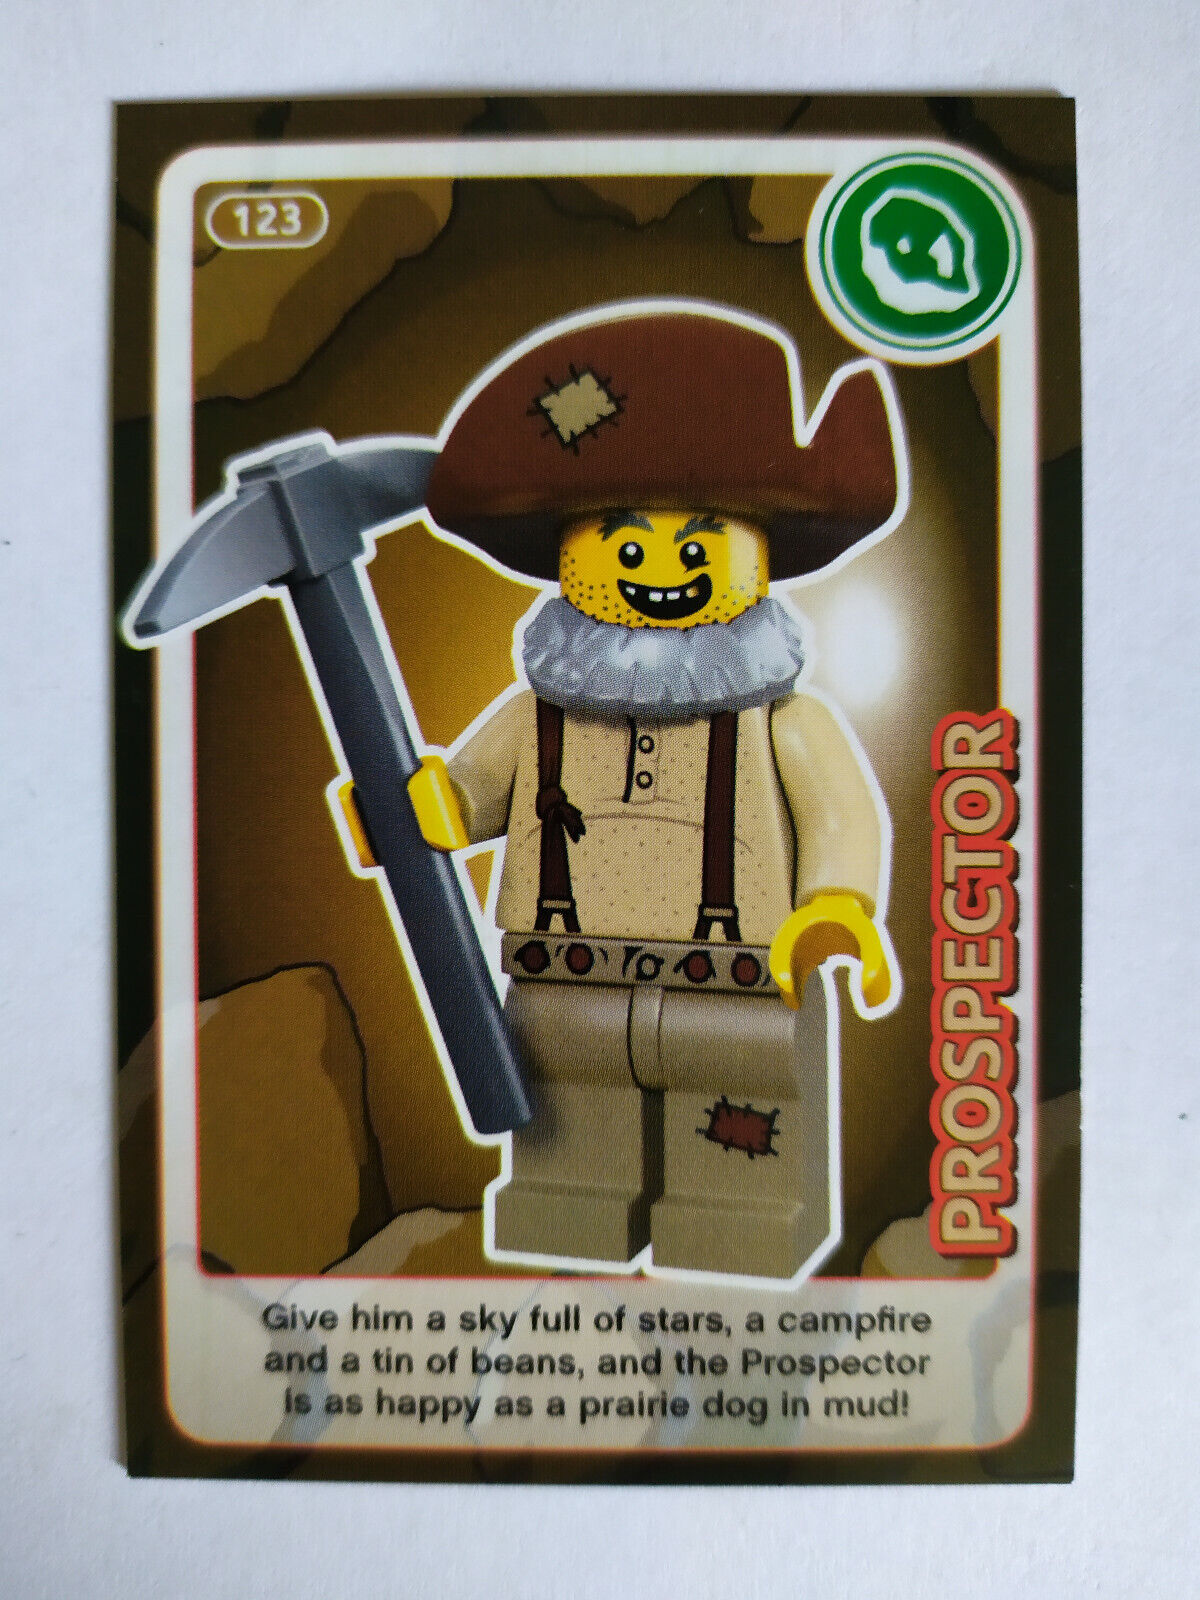 Lego Create The World Trading Card Number 123